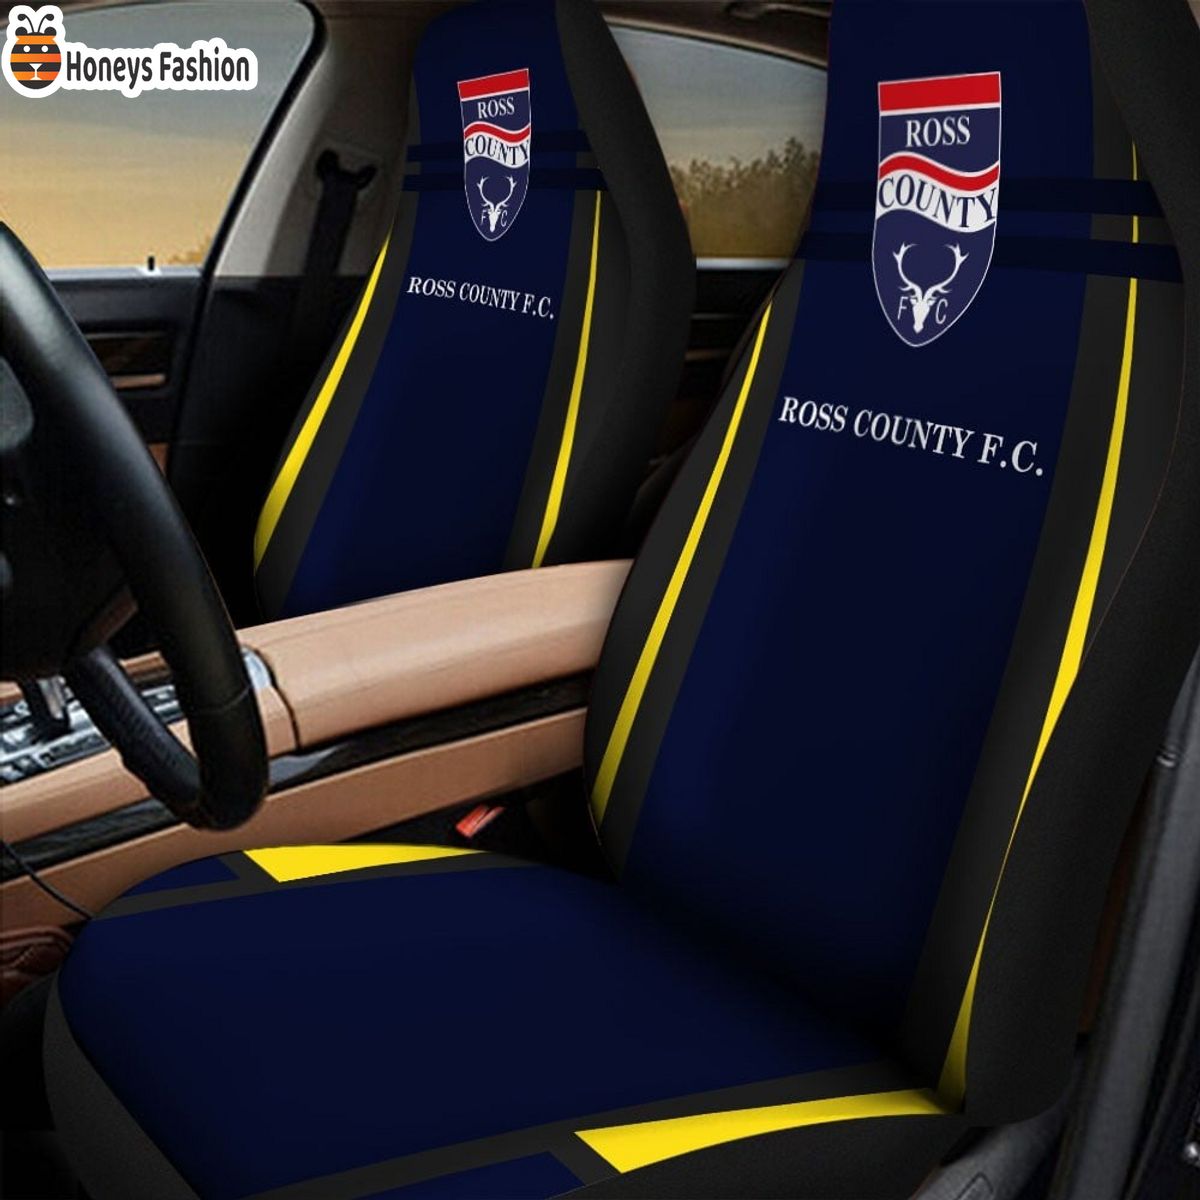 Ross County F.C. car seat cover